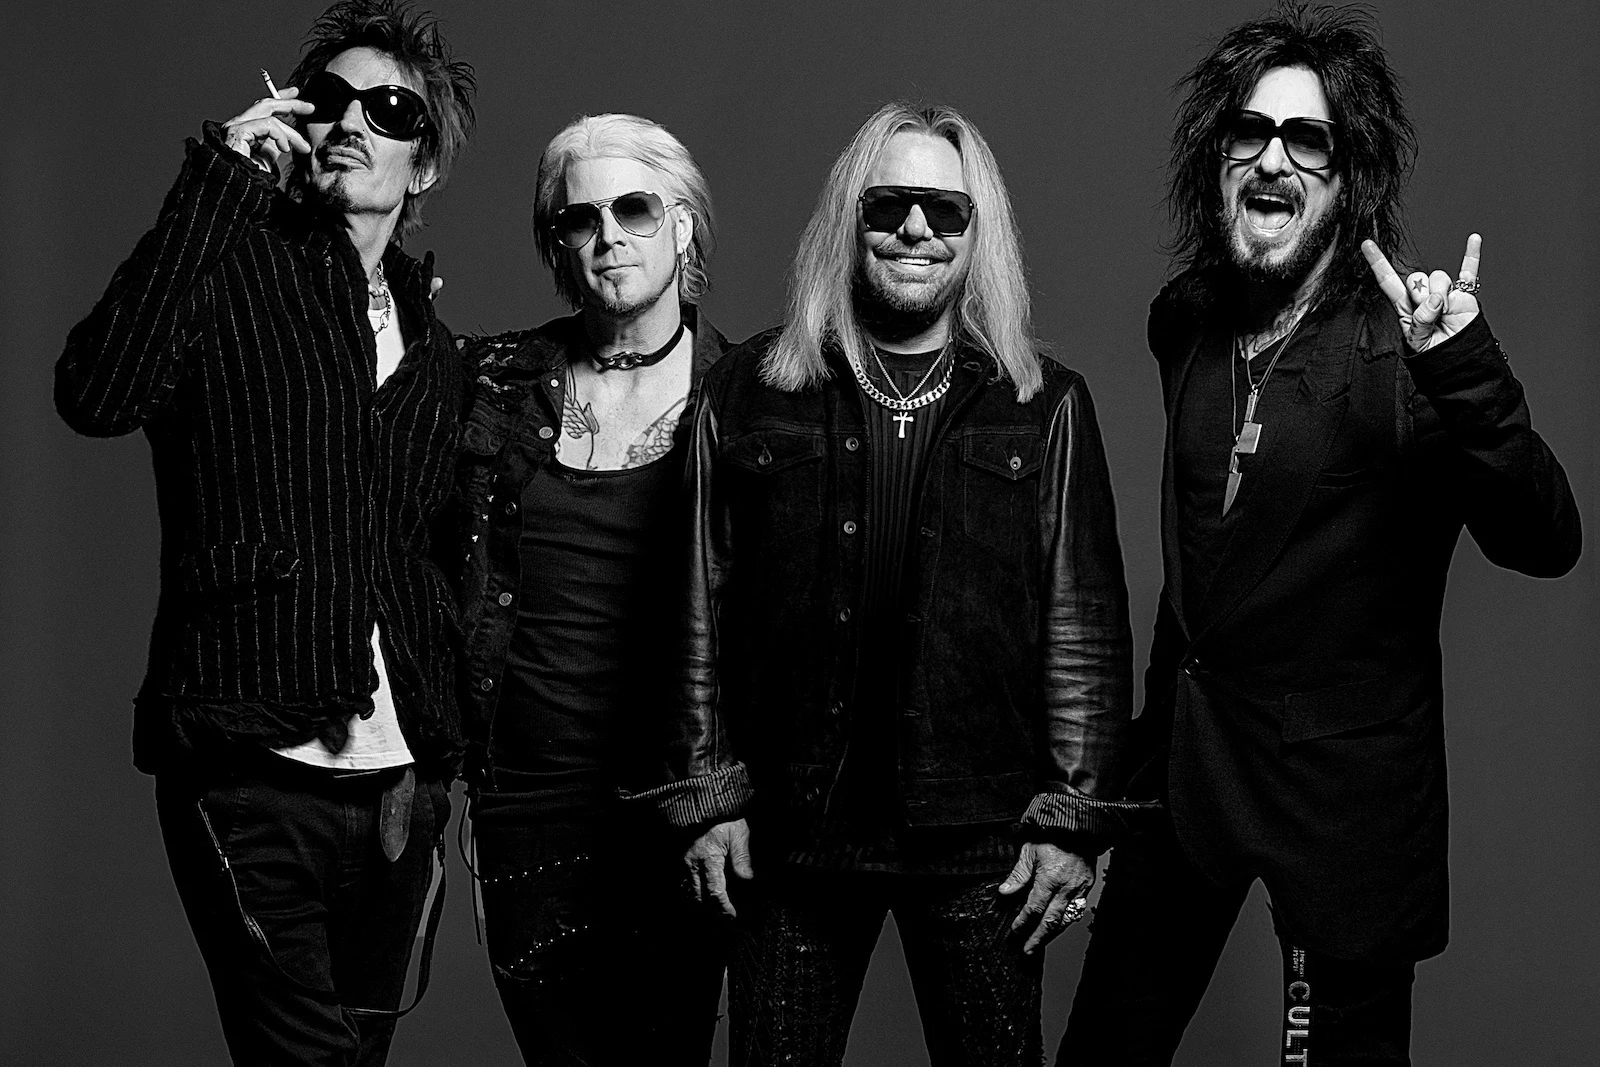 Interview: Vince Neil Discusses the Future of Motley Crue